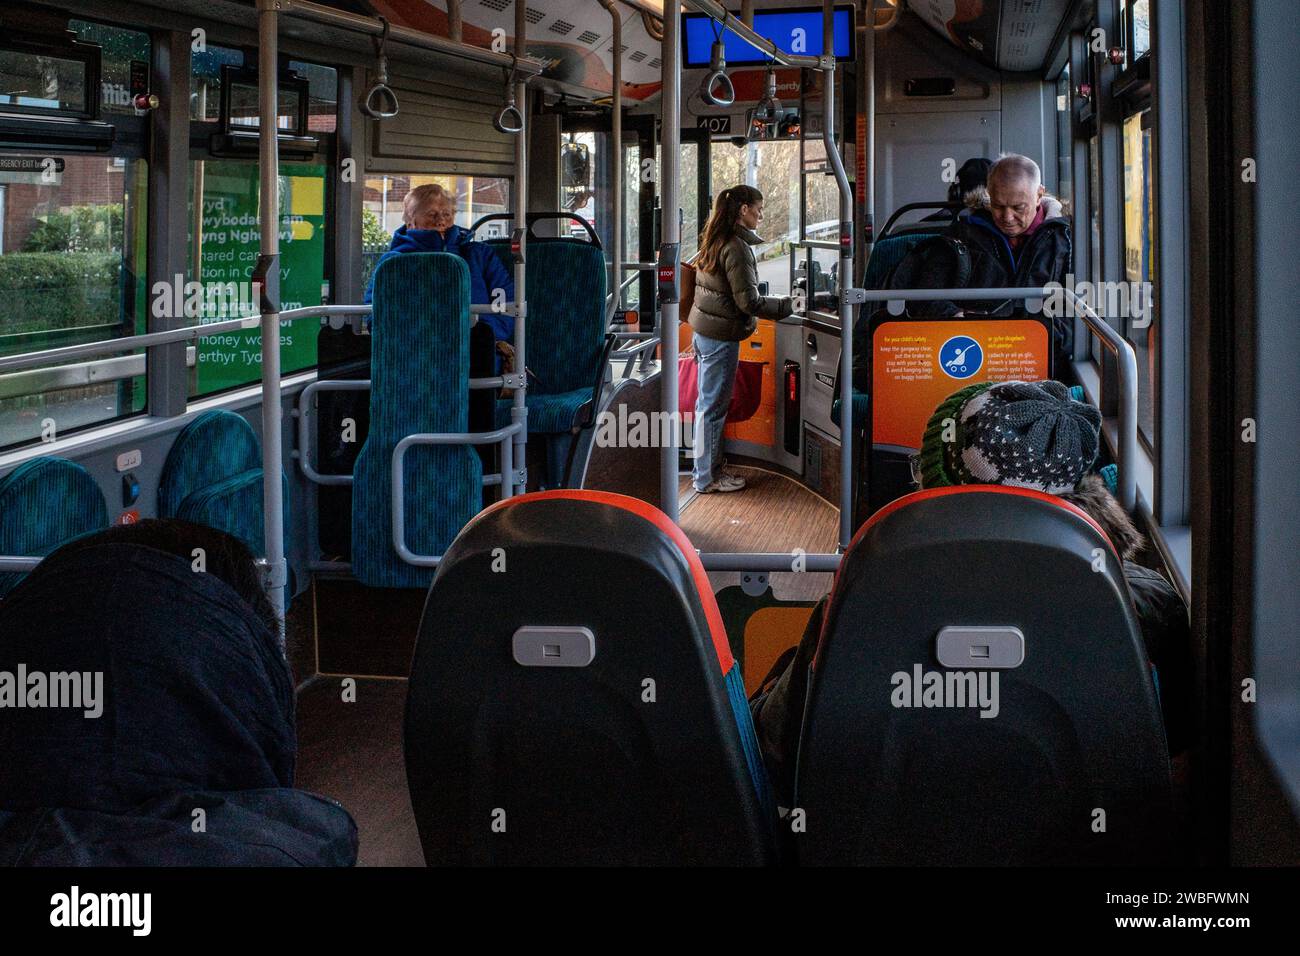 View from inside a Bus on a city route - Bus interior with passengers and someone buying a ticket. UK. Concept Transportation. Sustainable travel. Stock Photo